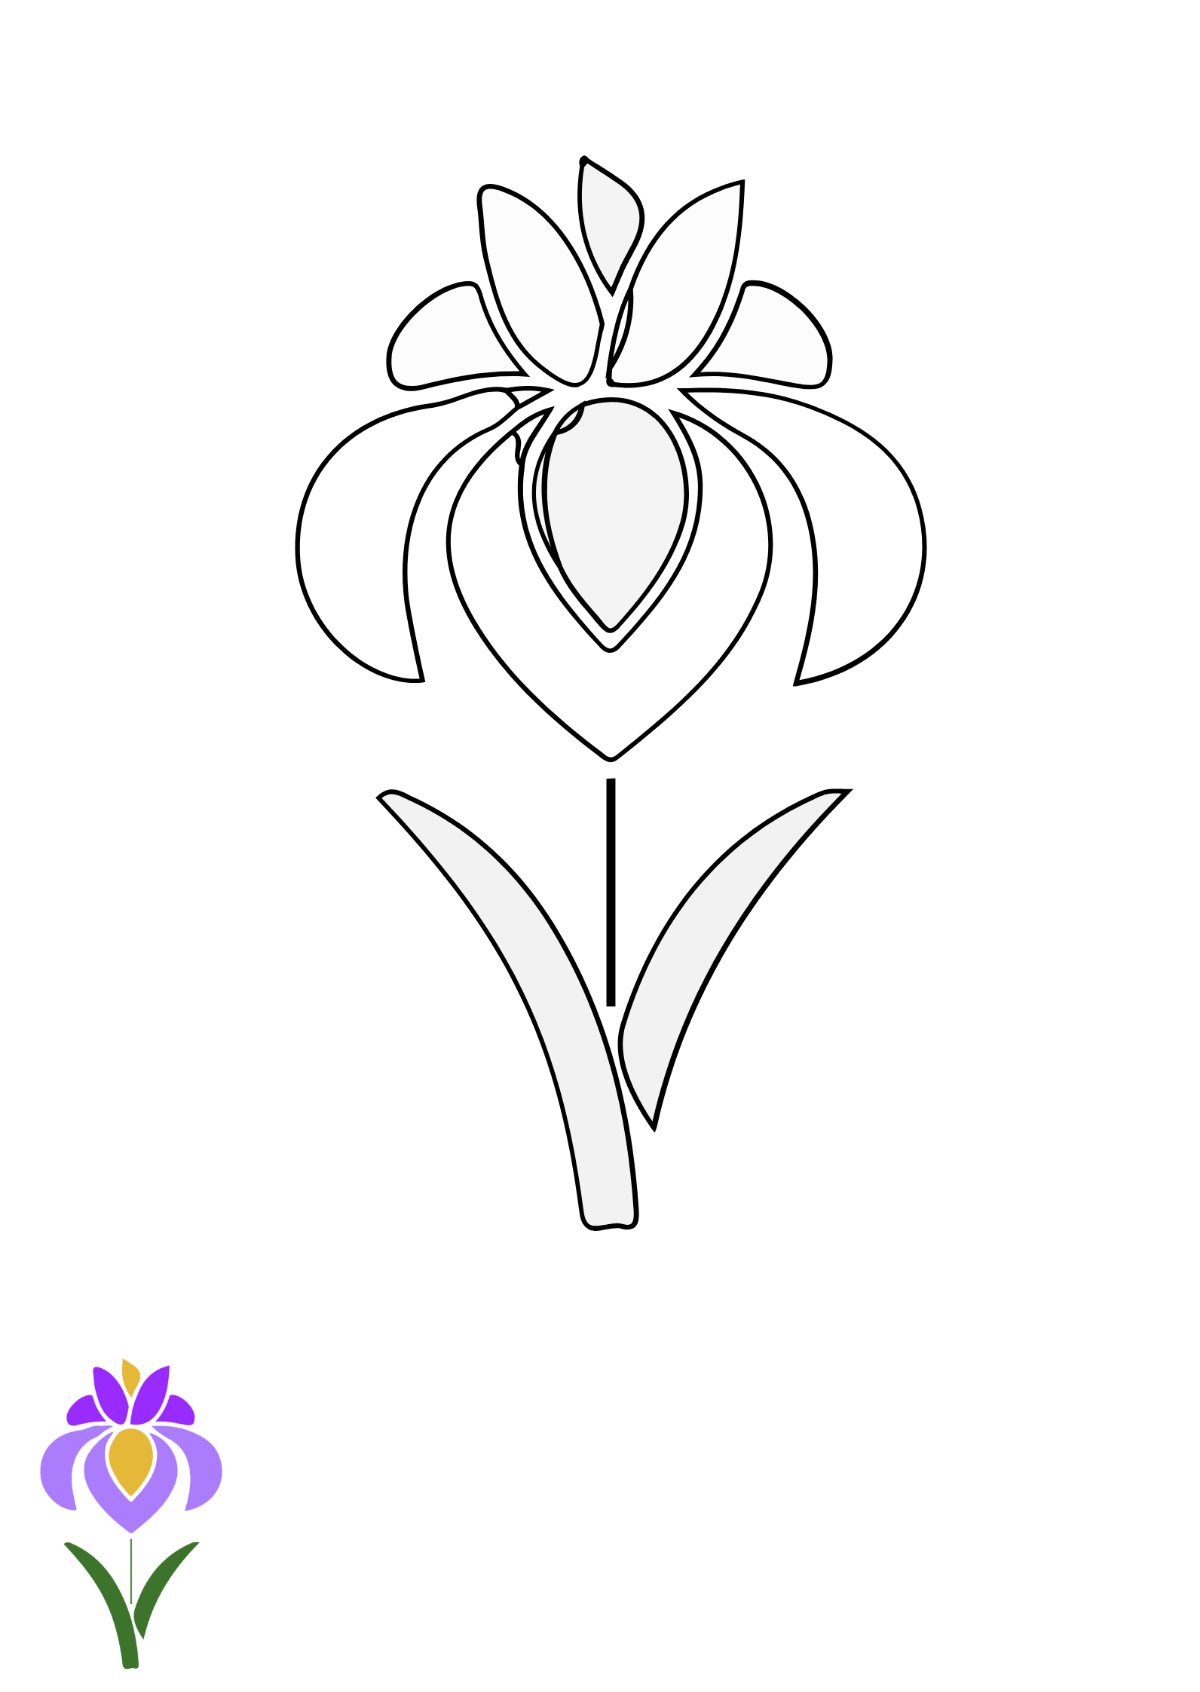 Iris Flower Coloring Page Template